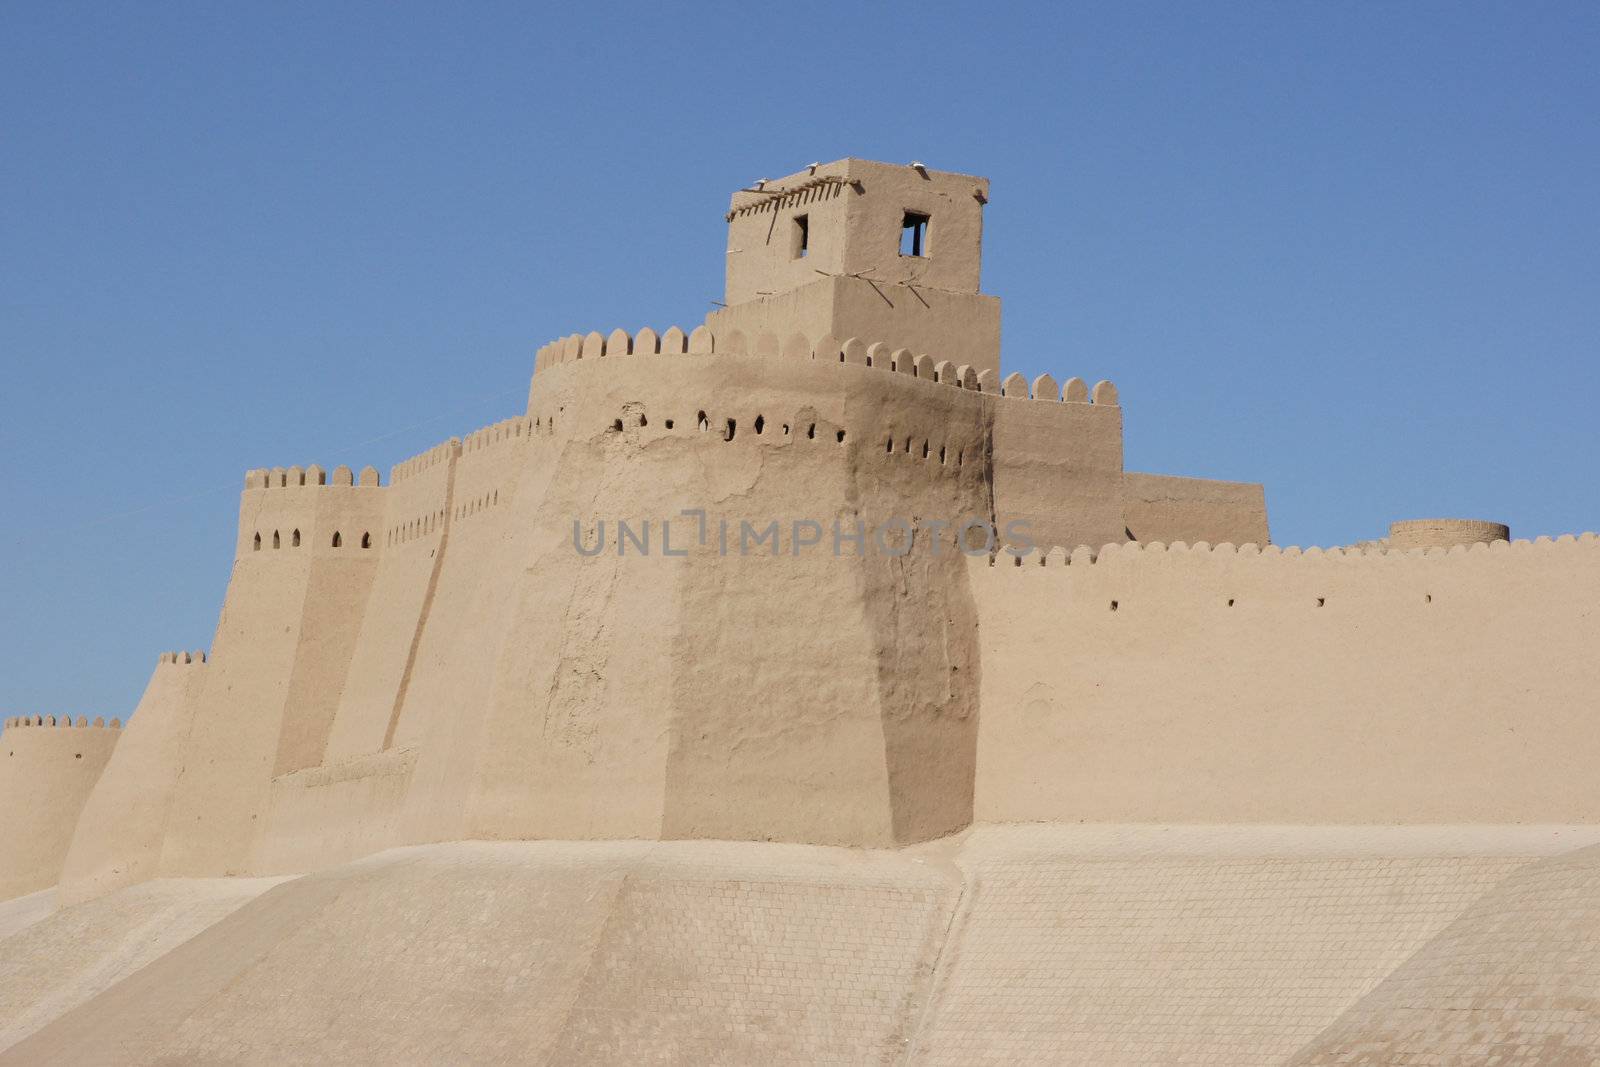 Wall of the ancient city of Khiva, silk road, Uzbekistan, Central Asia